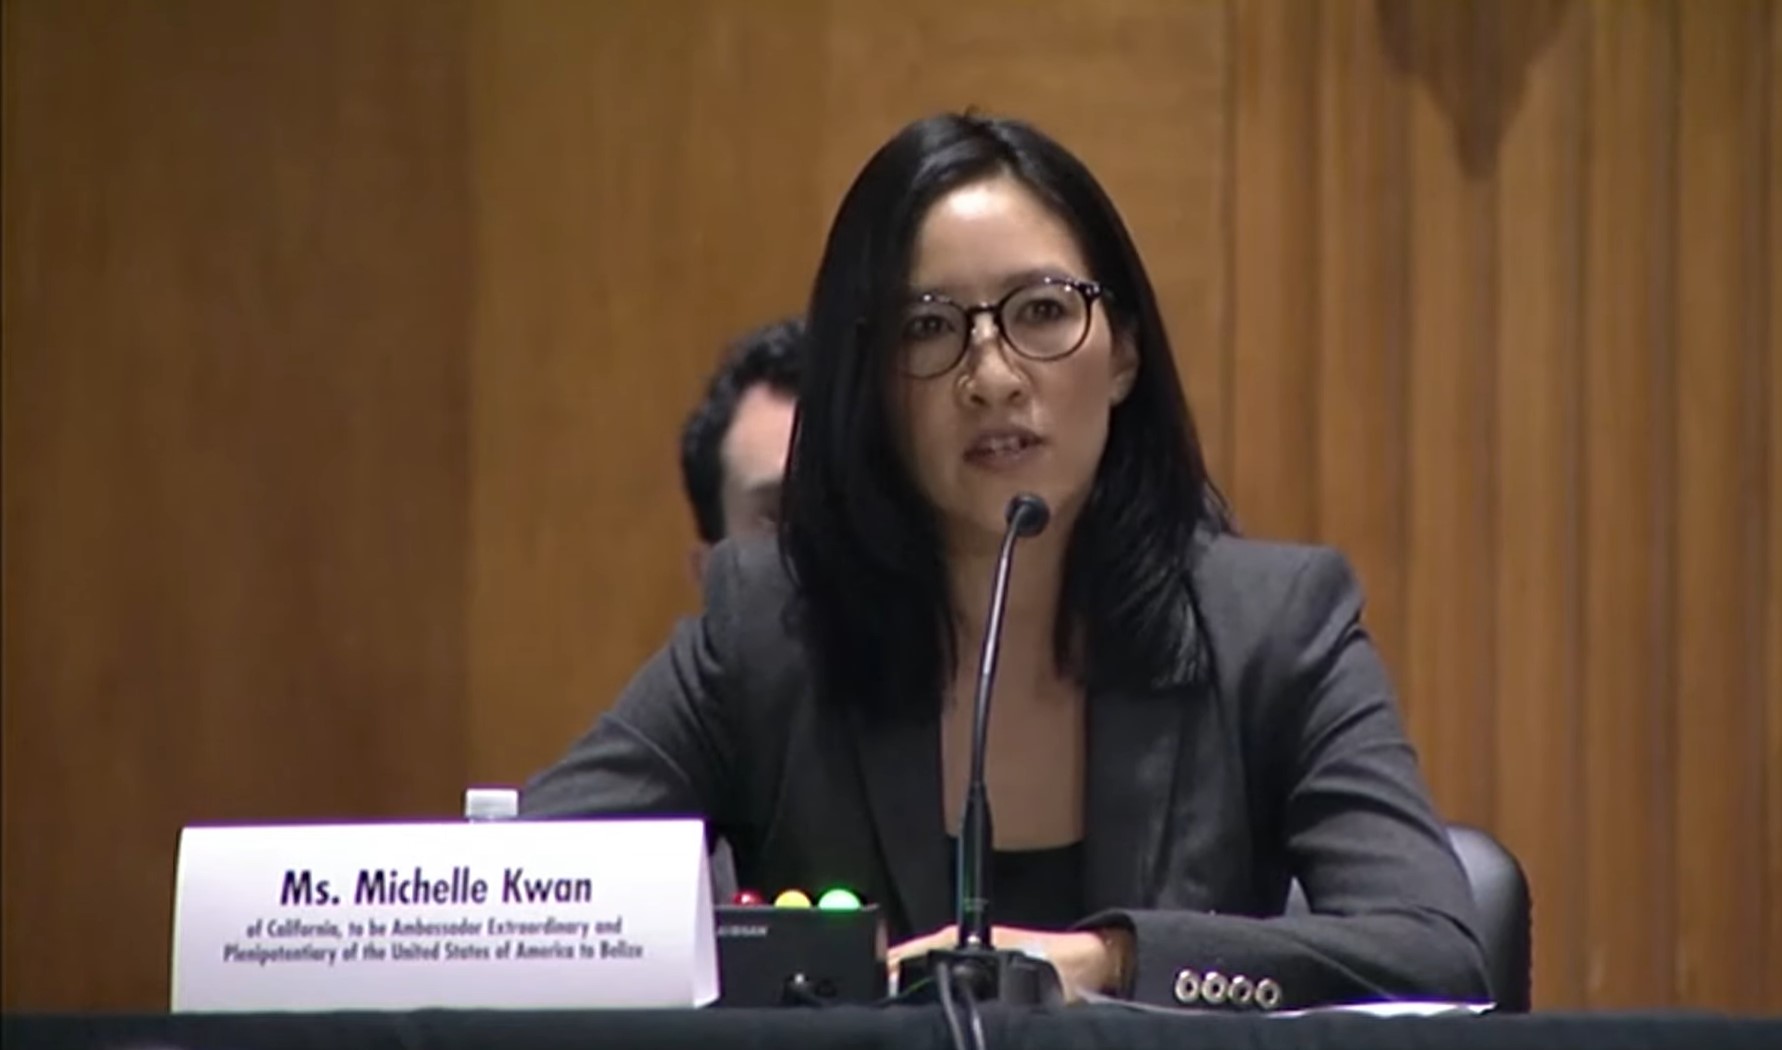 Senate Officially Confirms Michelle Kwan as US ambassador to Belize